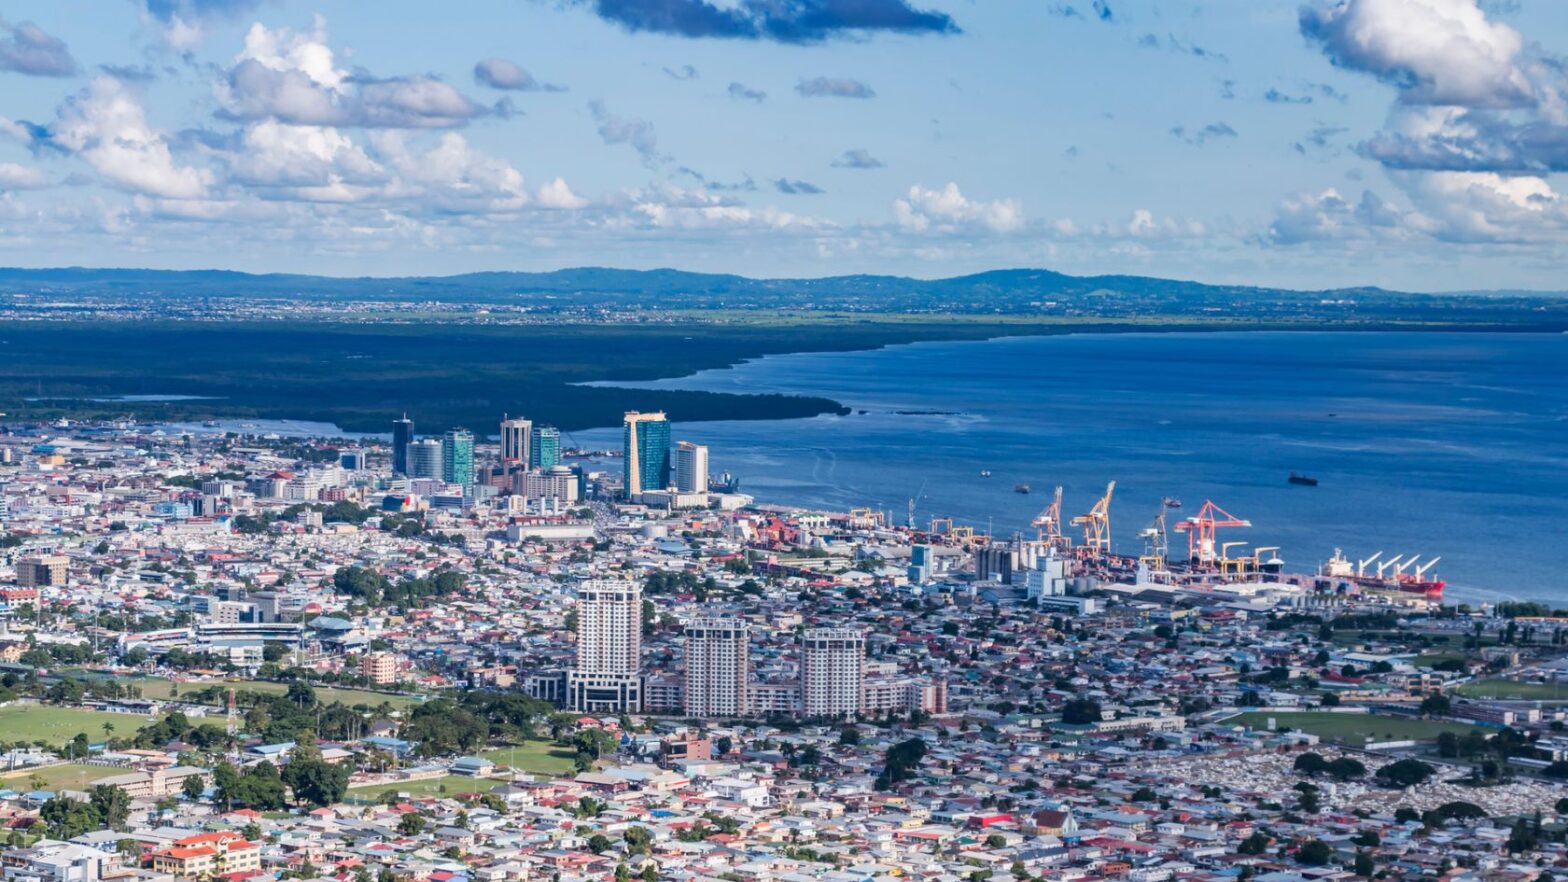 aerial view of Port of Spain in Trinidadq